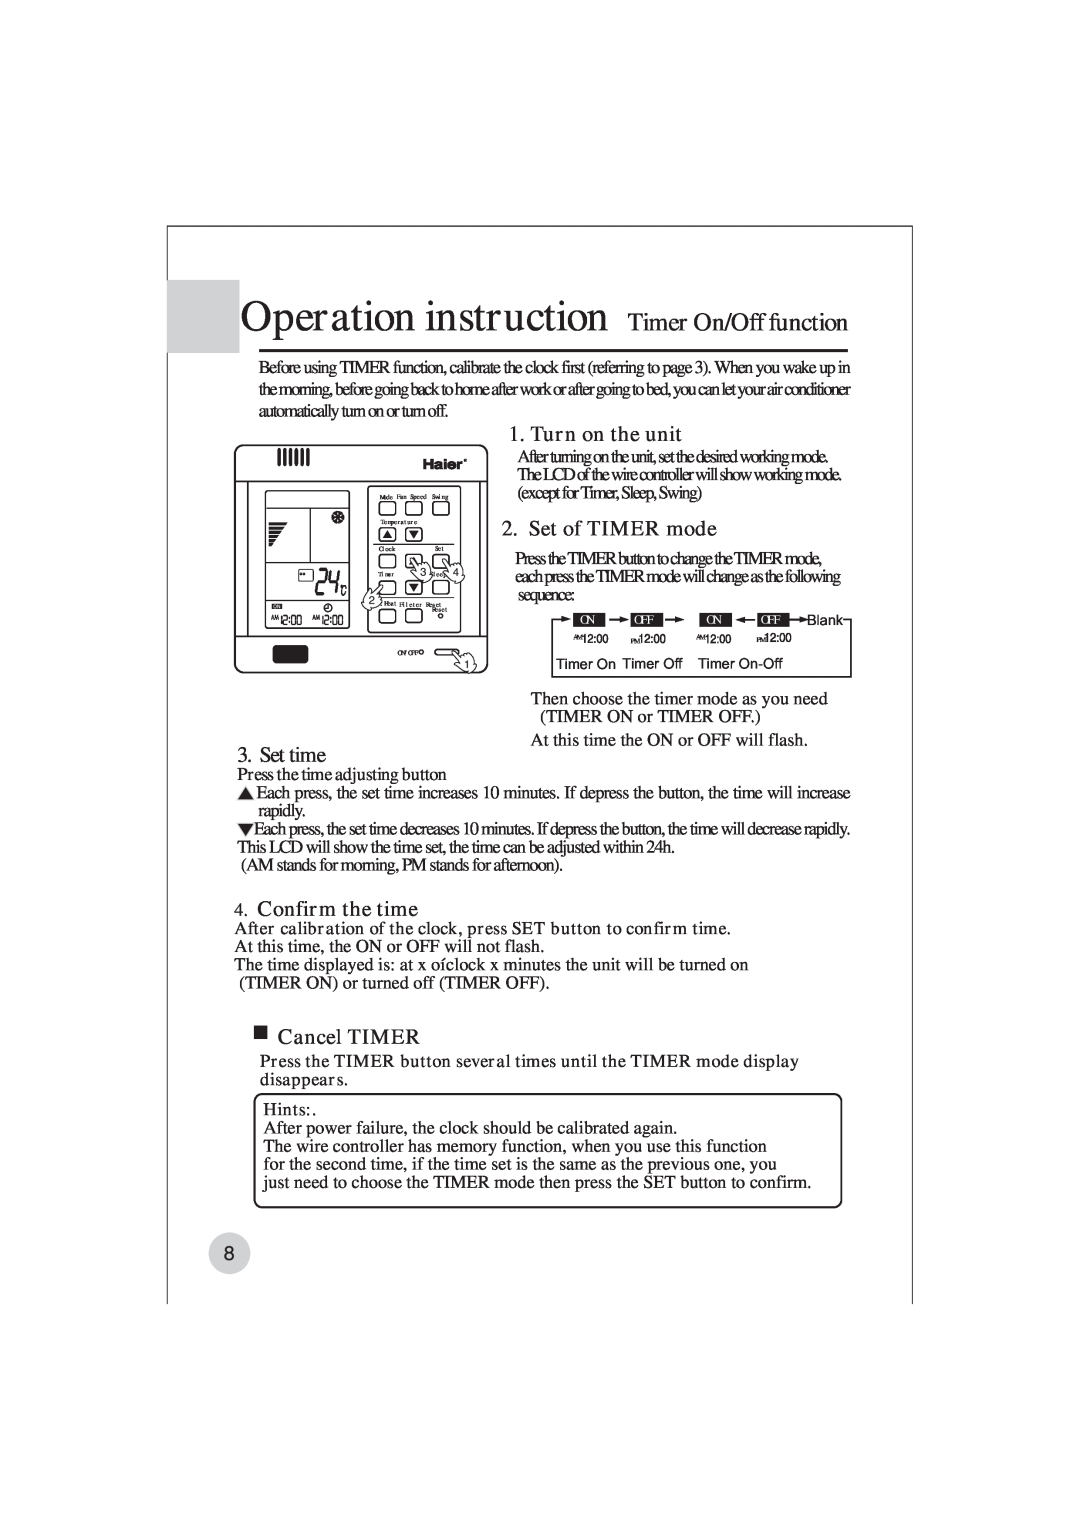 Haier AE122BCAAA (H2EM-18H03) Operation instruction Timer On/Off function, Turn on the unit, Set of TIMER mode, Set time 